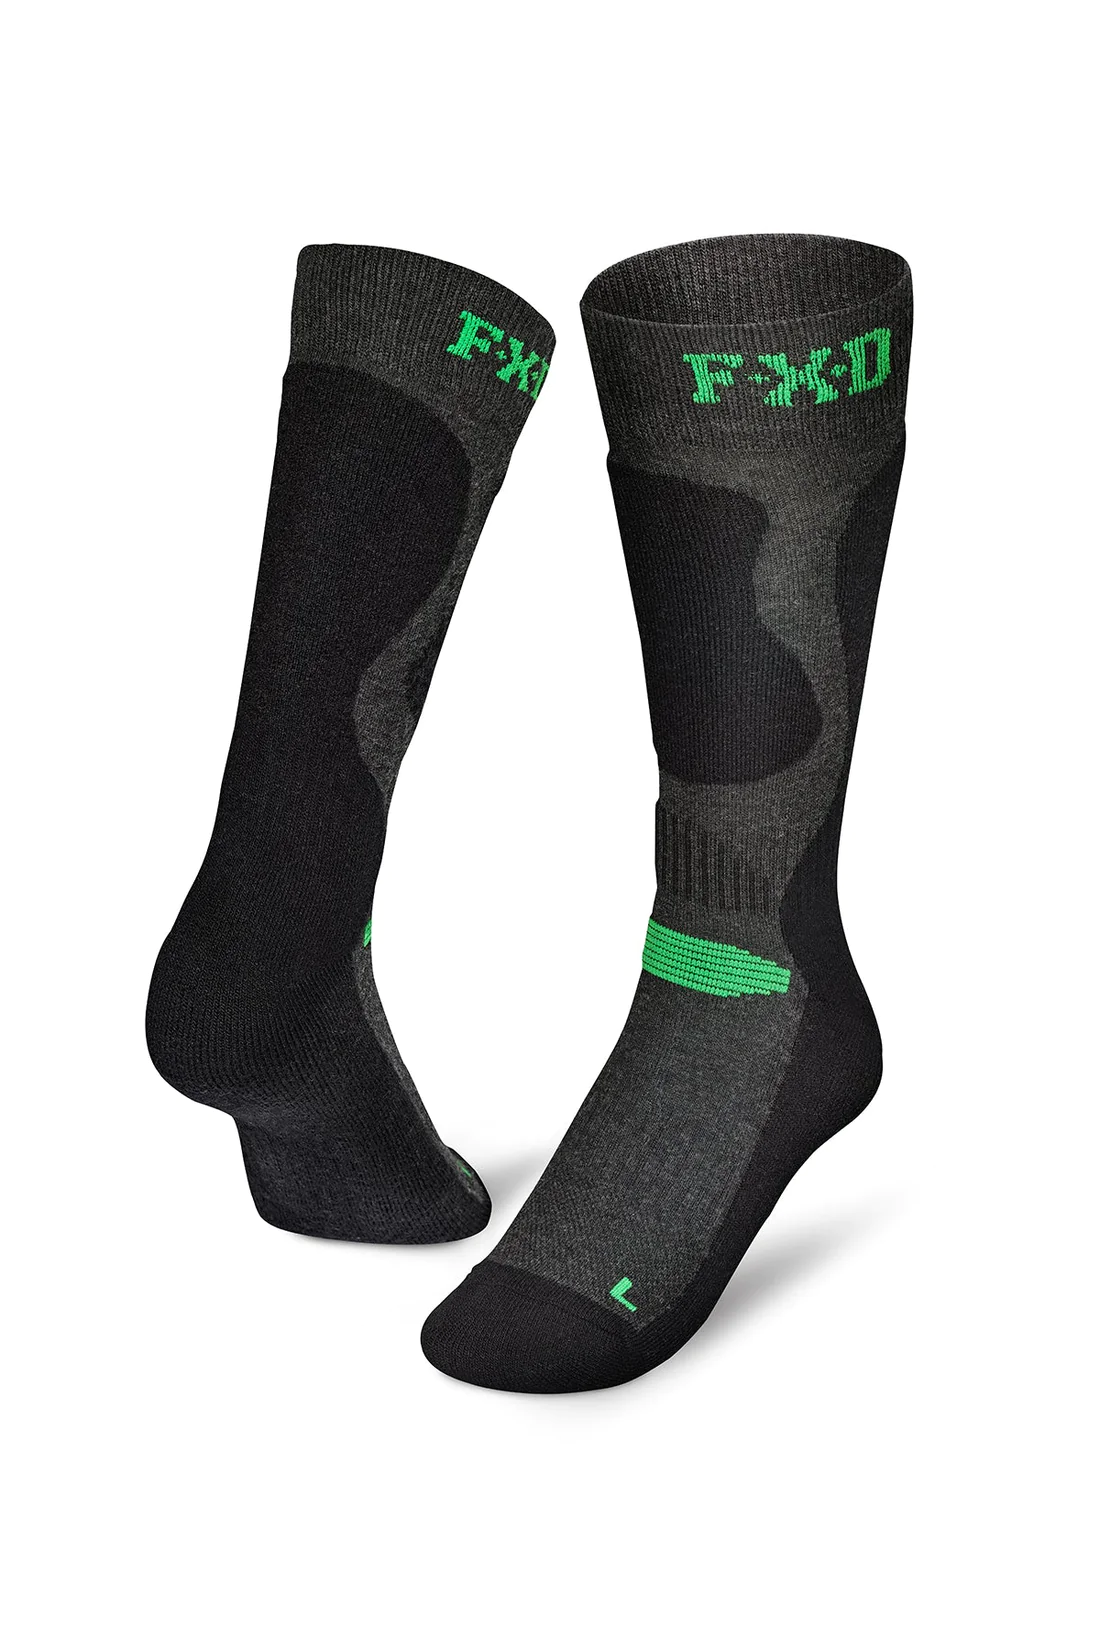 FXD Technical Socks SK-7 (2 Pair) - Safety1st